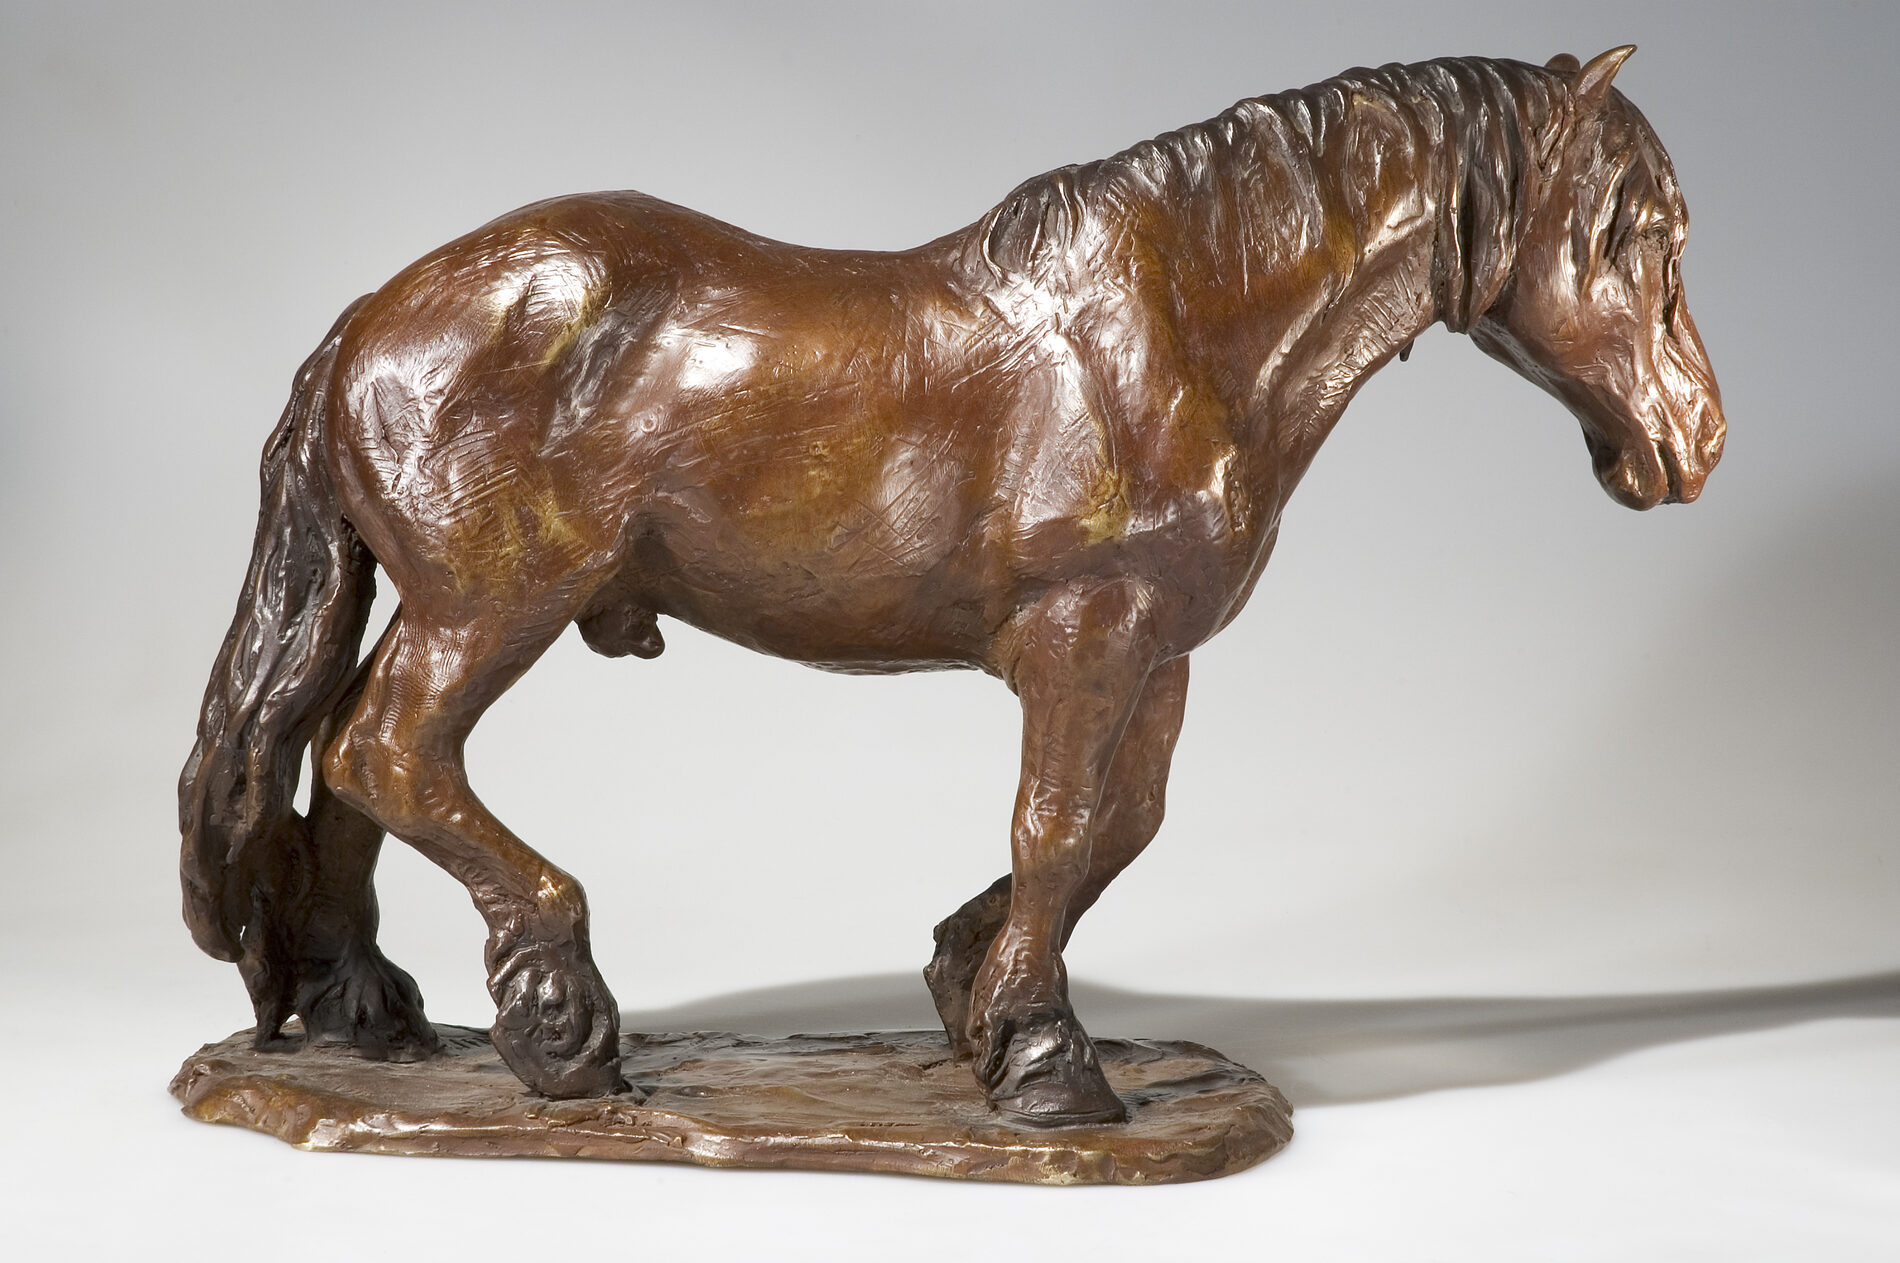 A bronze statue of a horse standing on a white background.